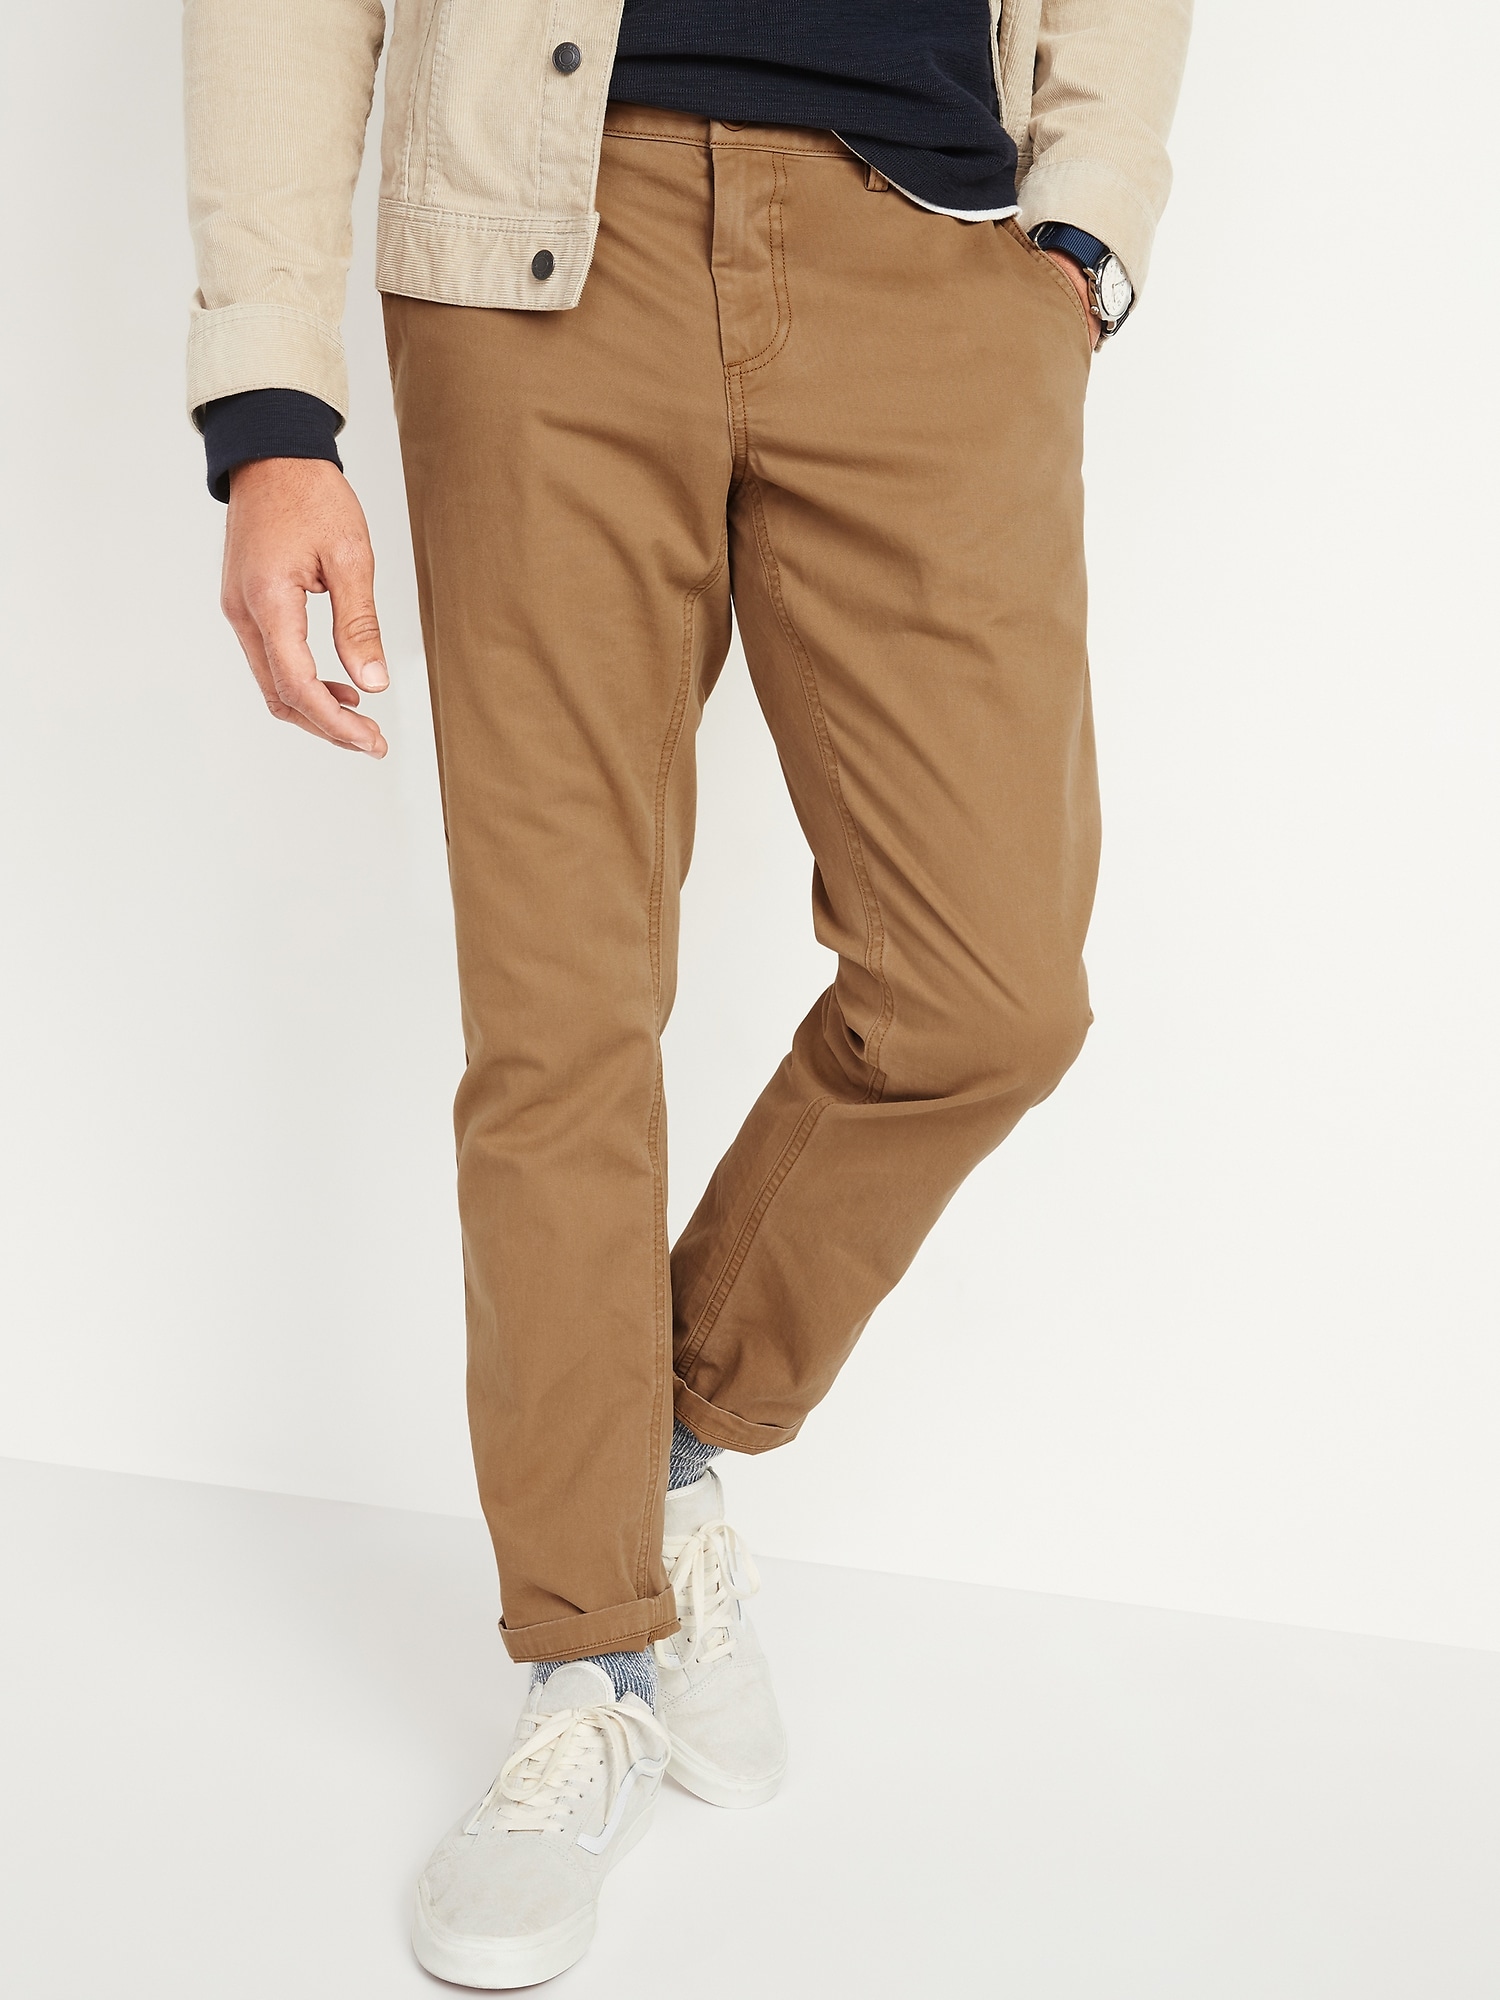 Athletic Taper Lived-In Khaki Non-Stretch Pants for Men